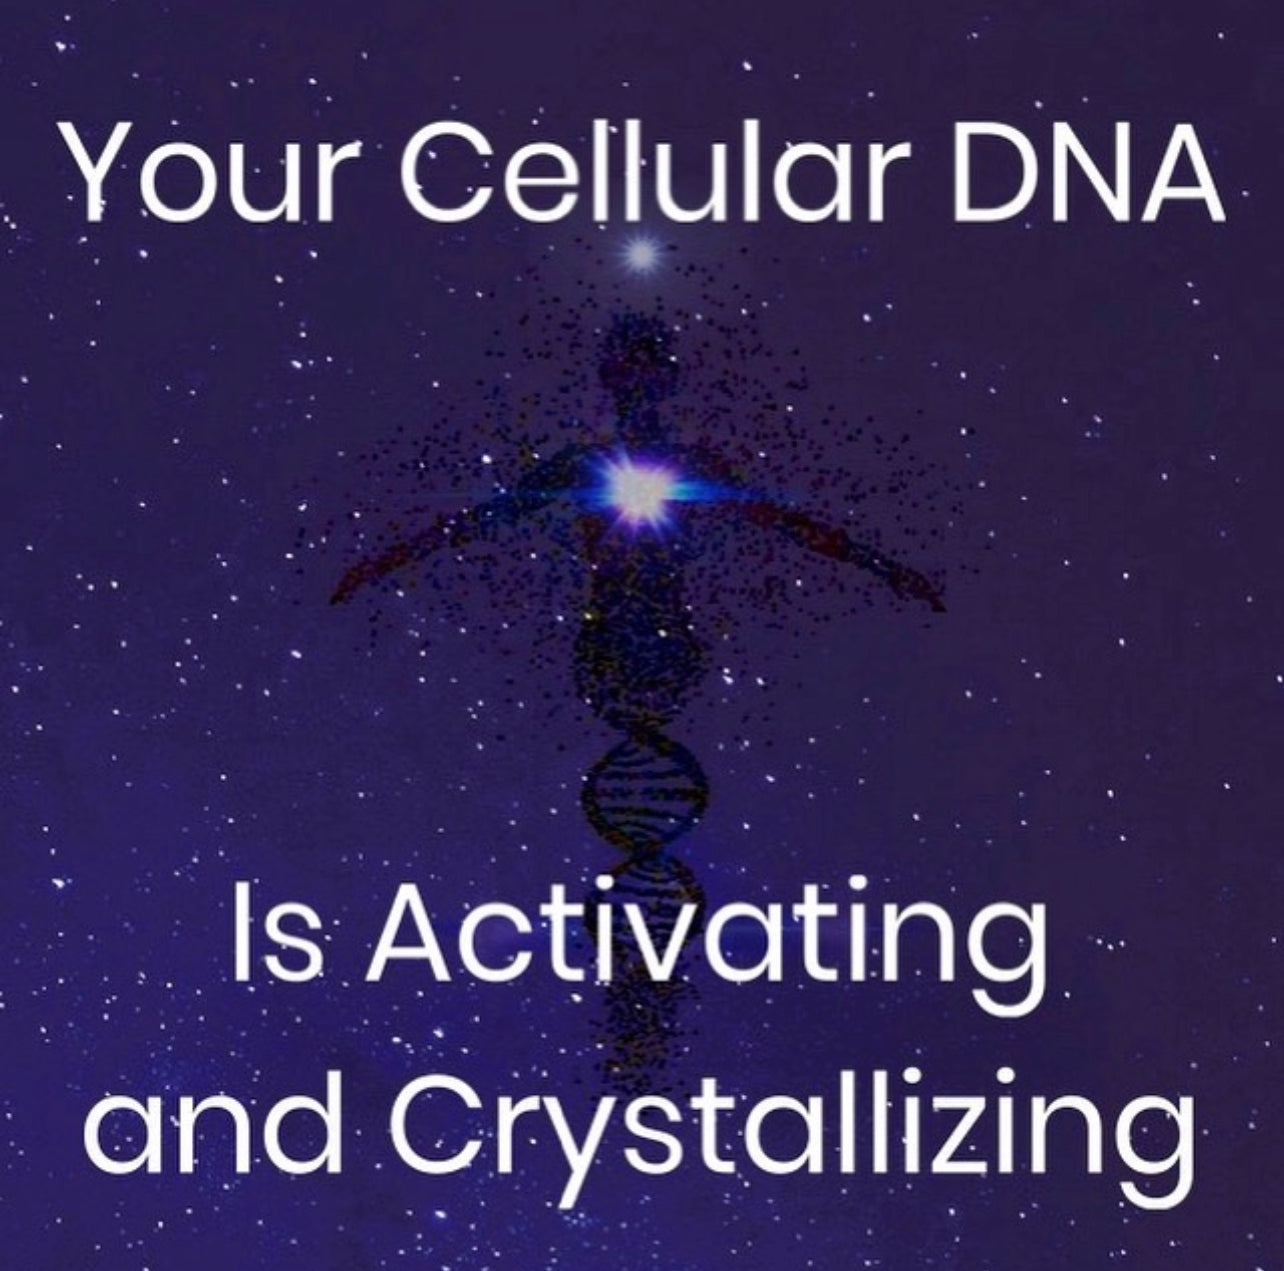 Activate DNA - Cellular Upgrade Workouts